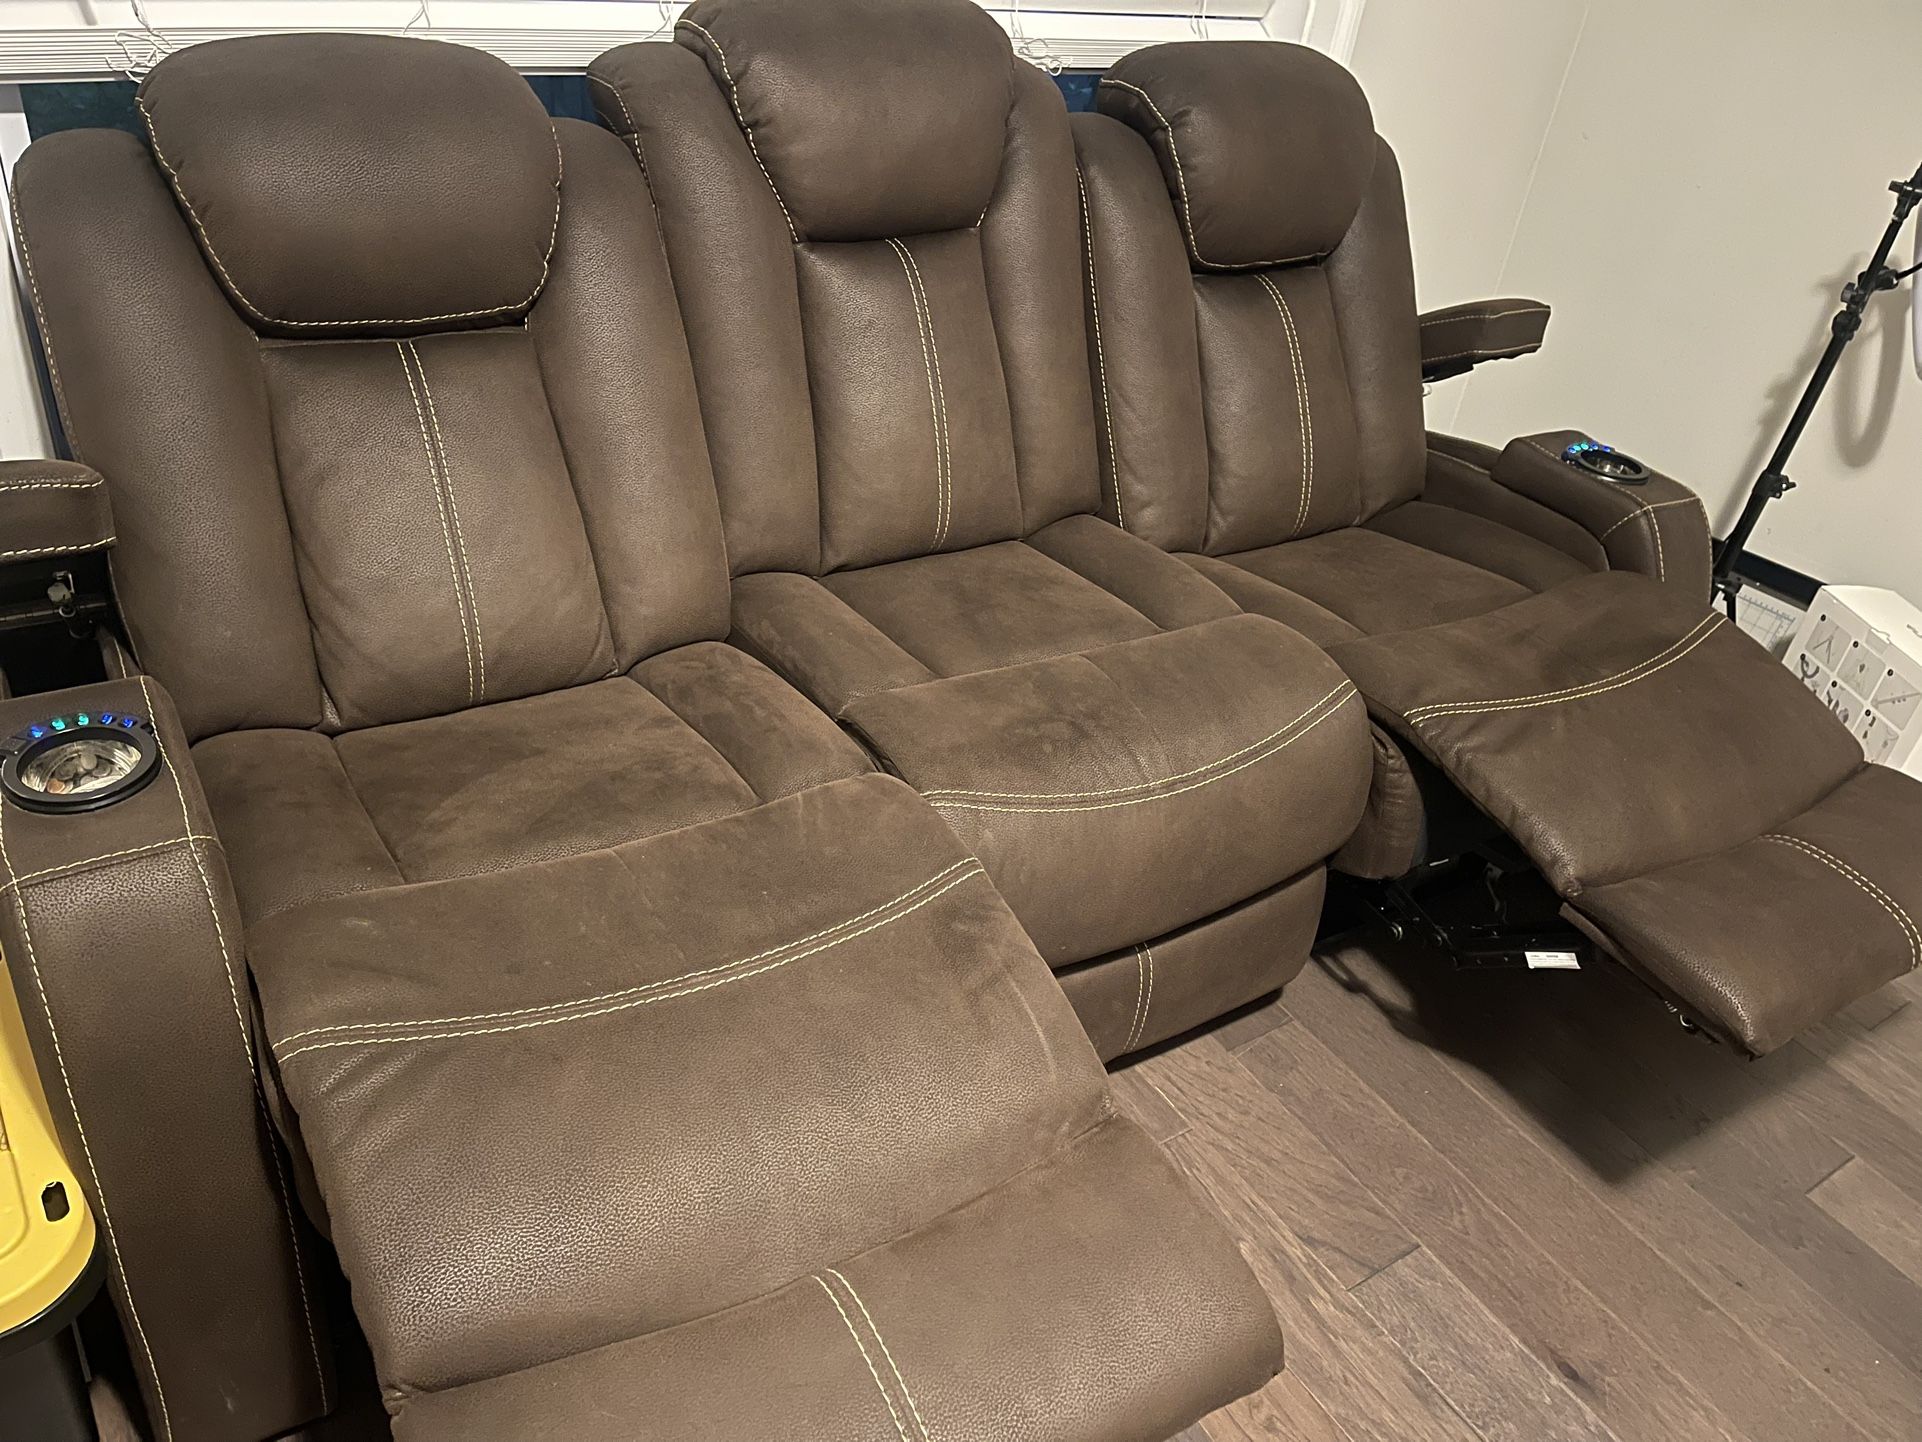 Moving Must Go! Excellent Condition Double Reclining Sofa 